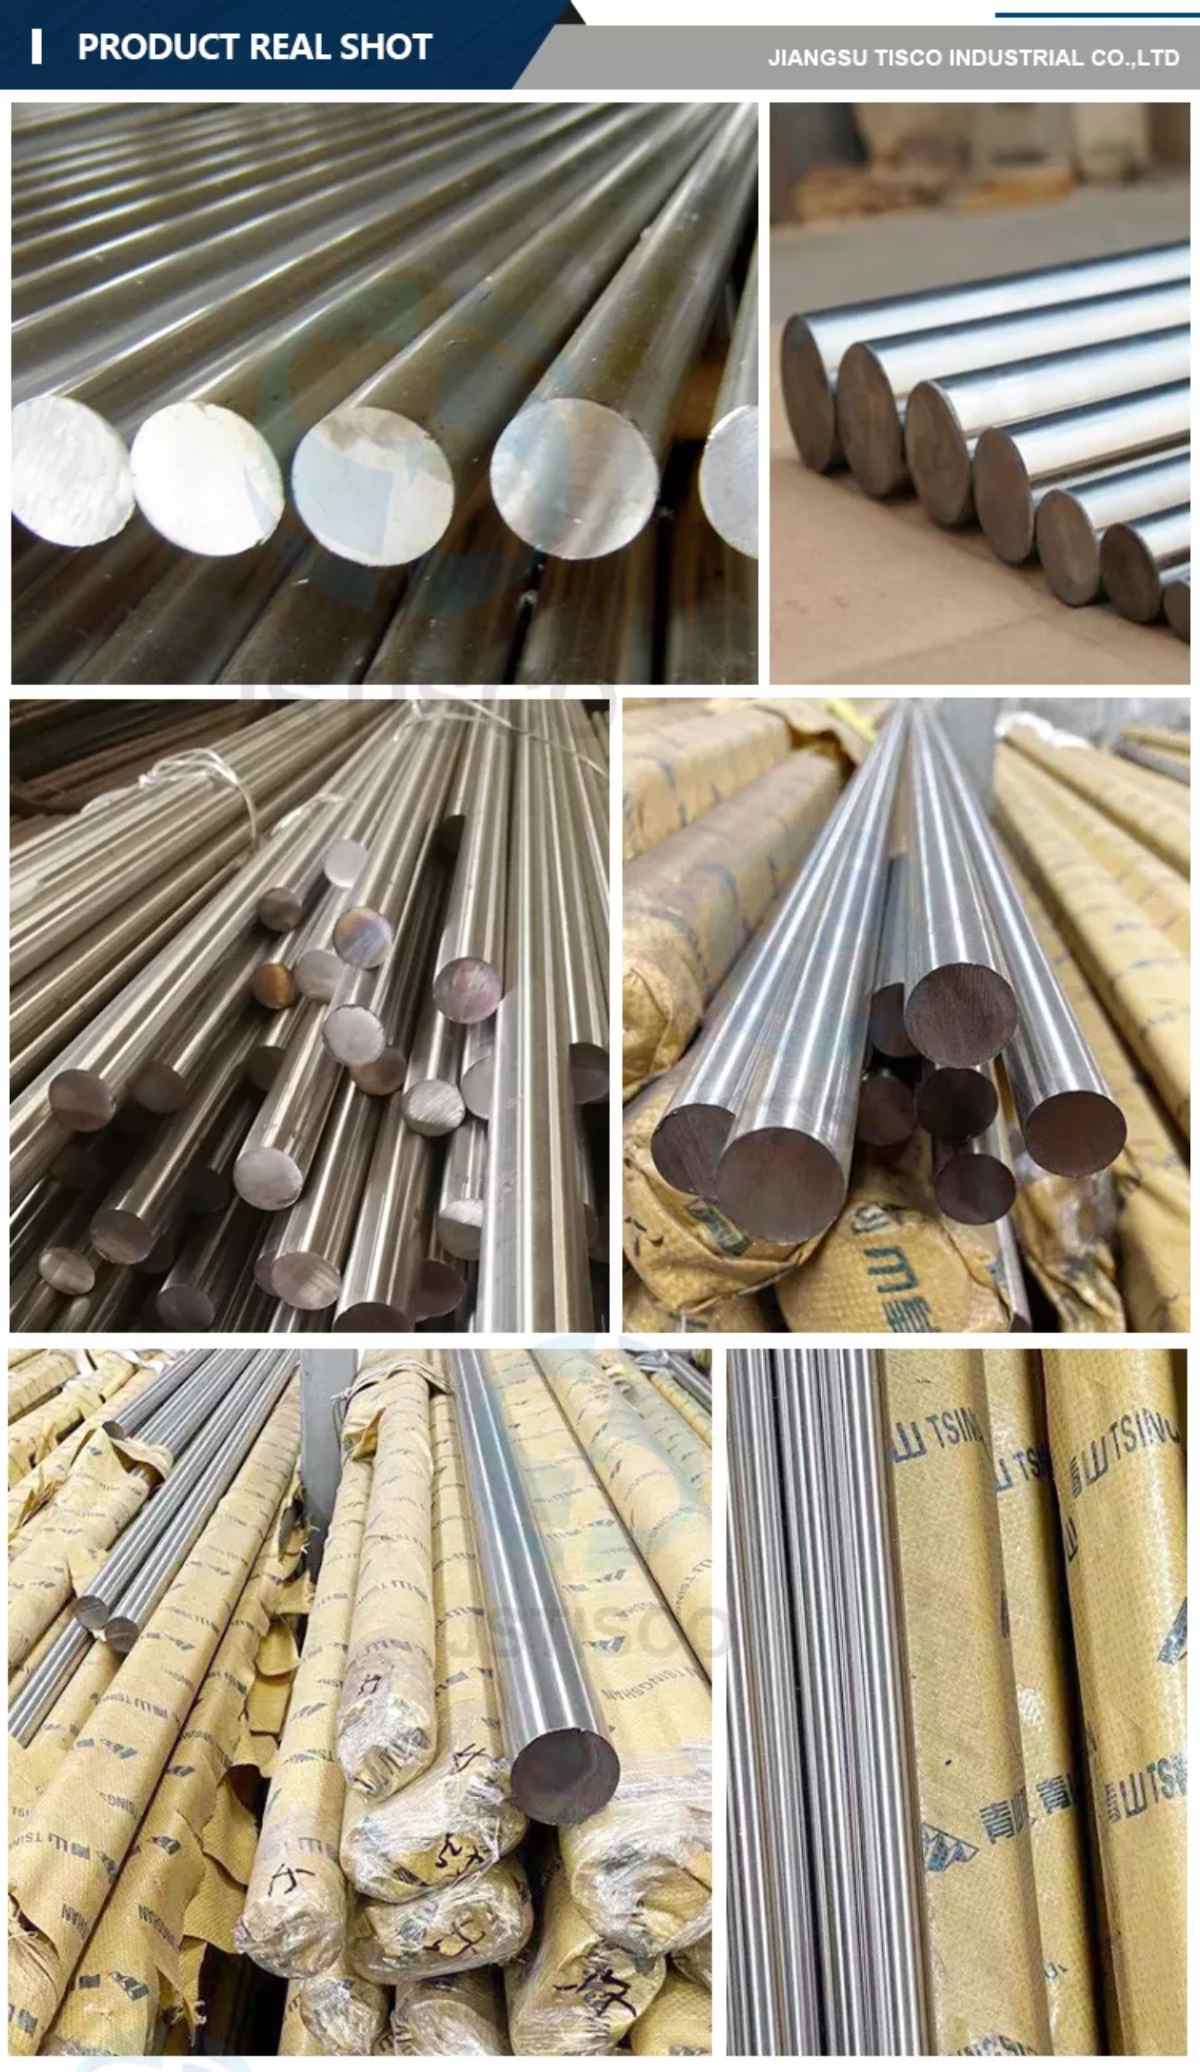 Details of Stainless Steel Round Bar